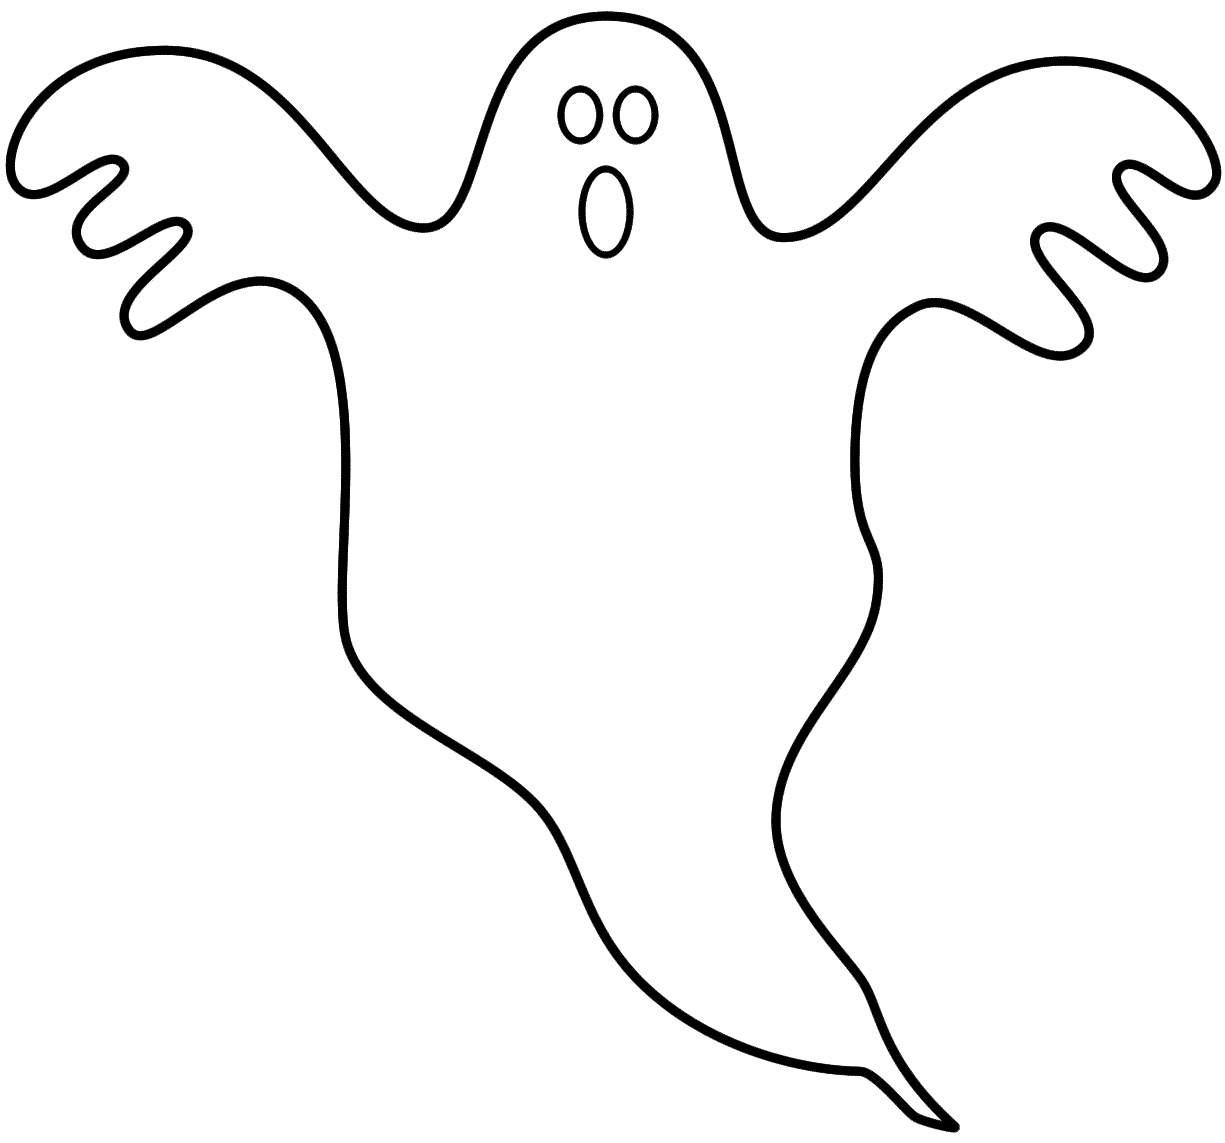 No spooky wooky 26 ghost coloring pages - Print Color Craft